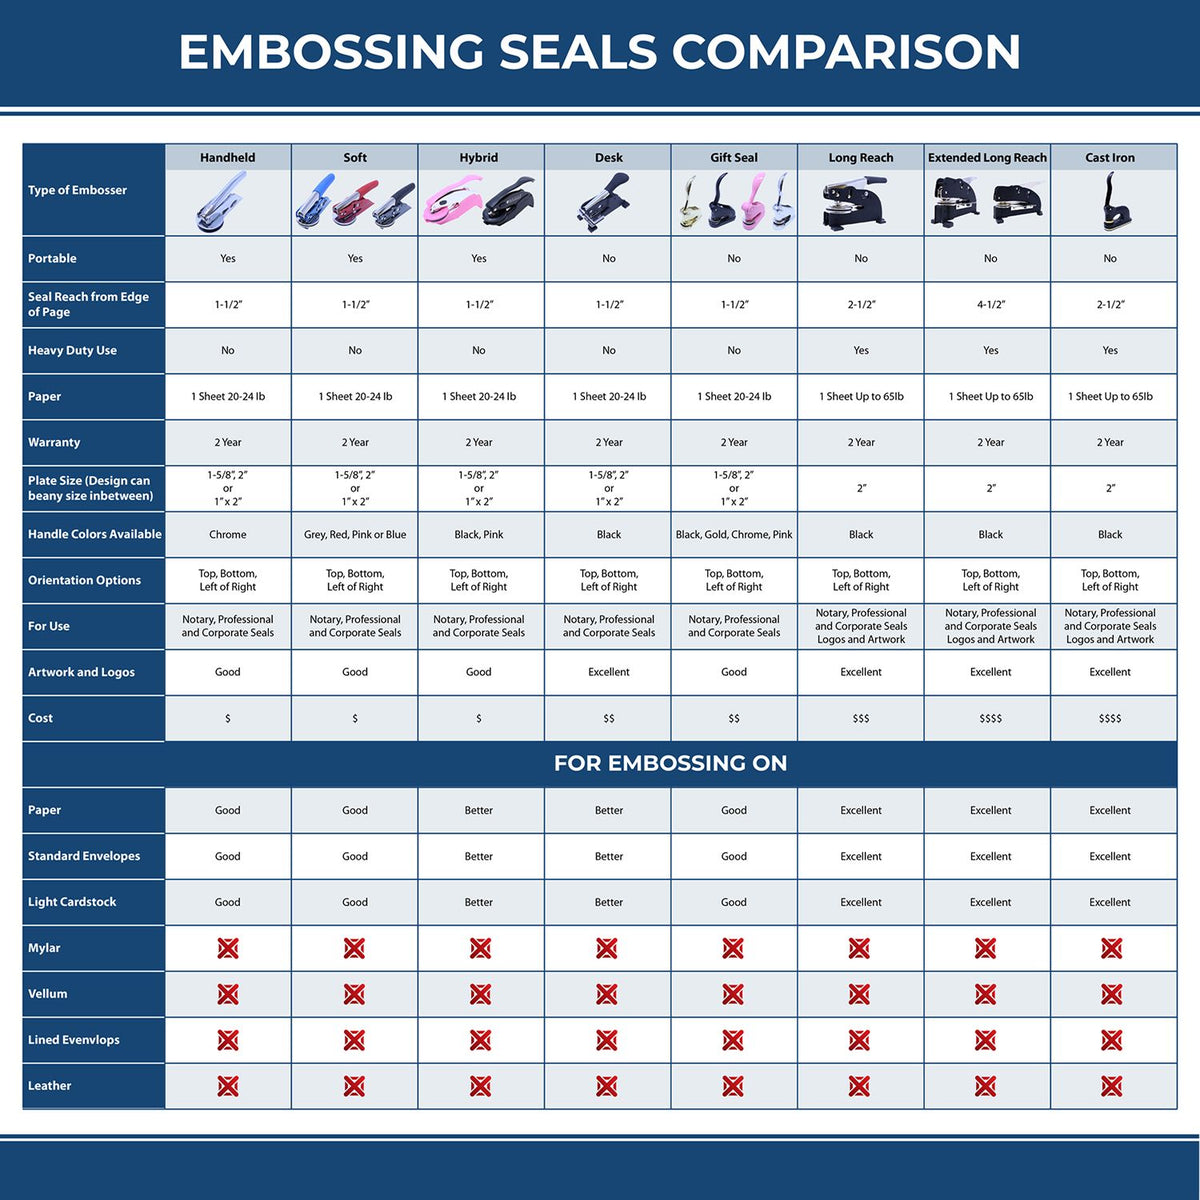 A comparison chart for the different types of mount models available for the Heavy Duty Cast Iron Georgia Architect Embosser.